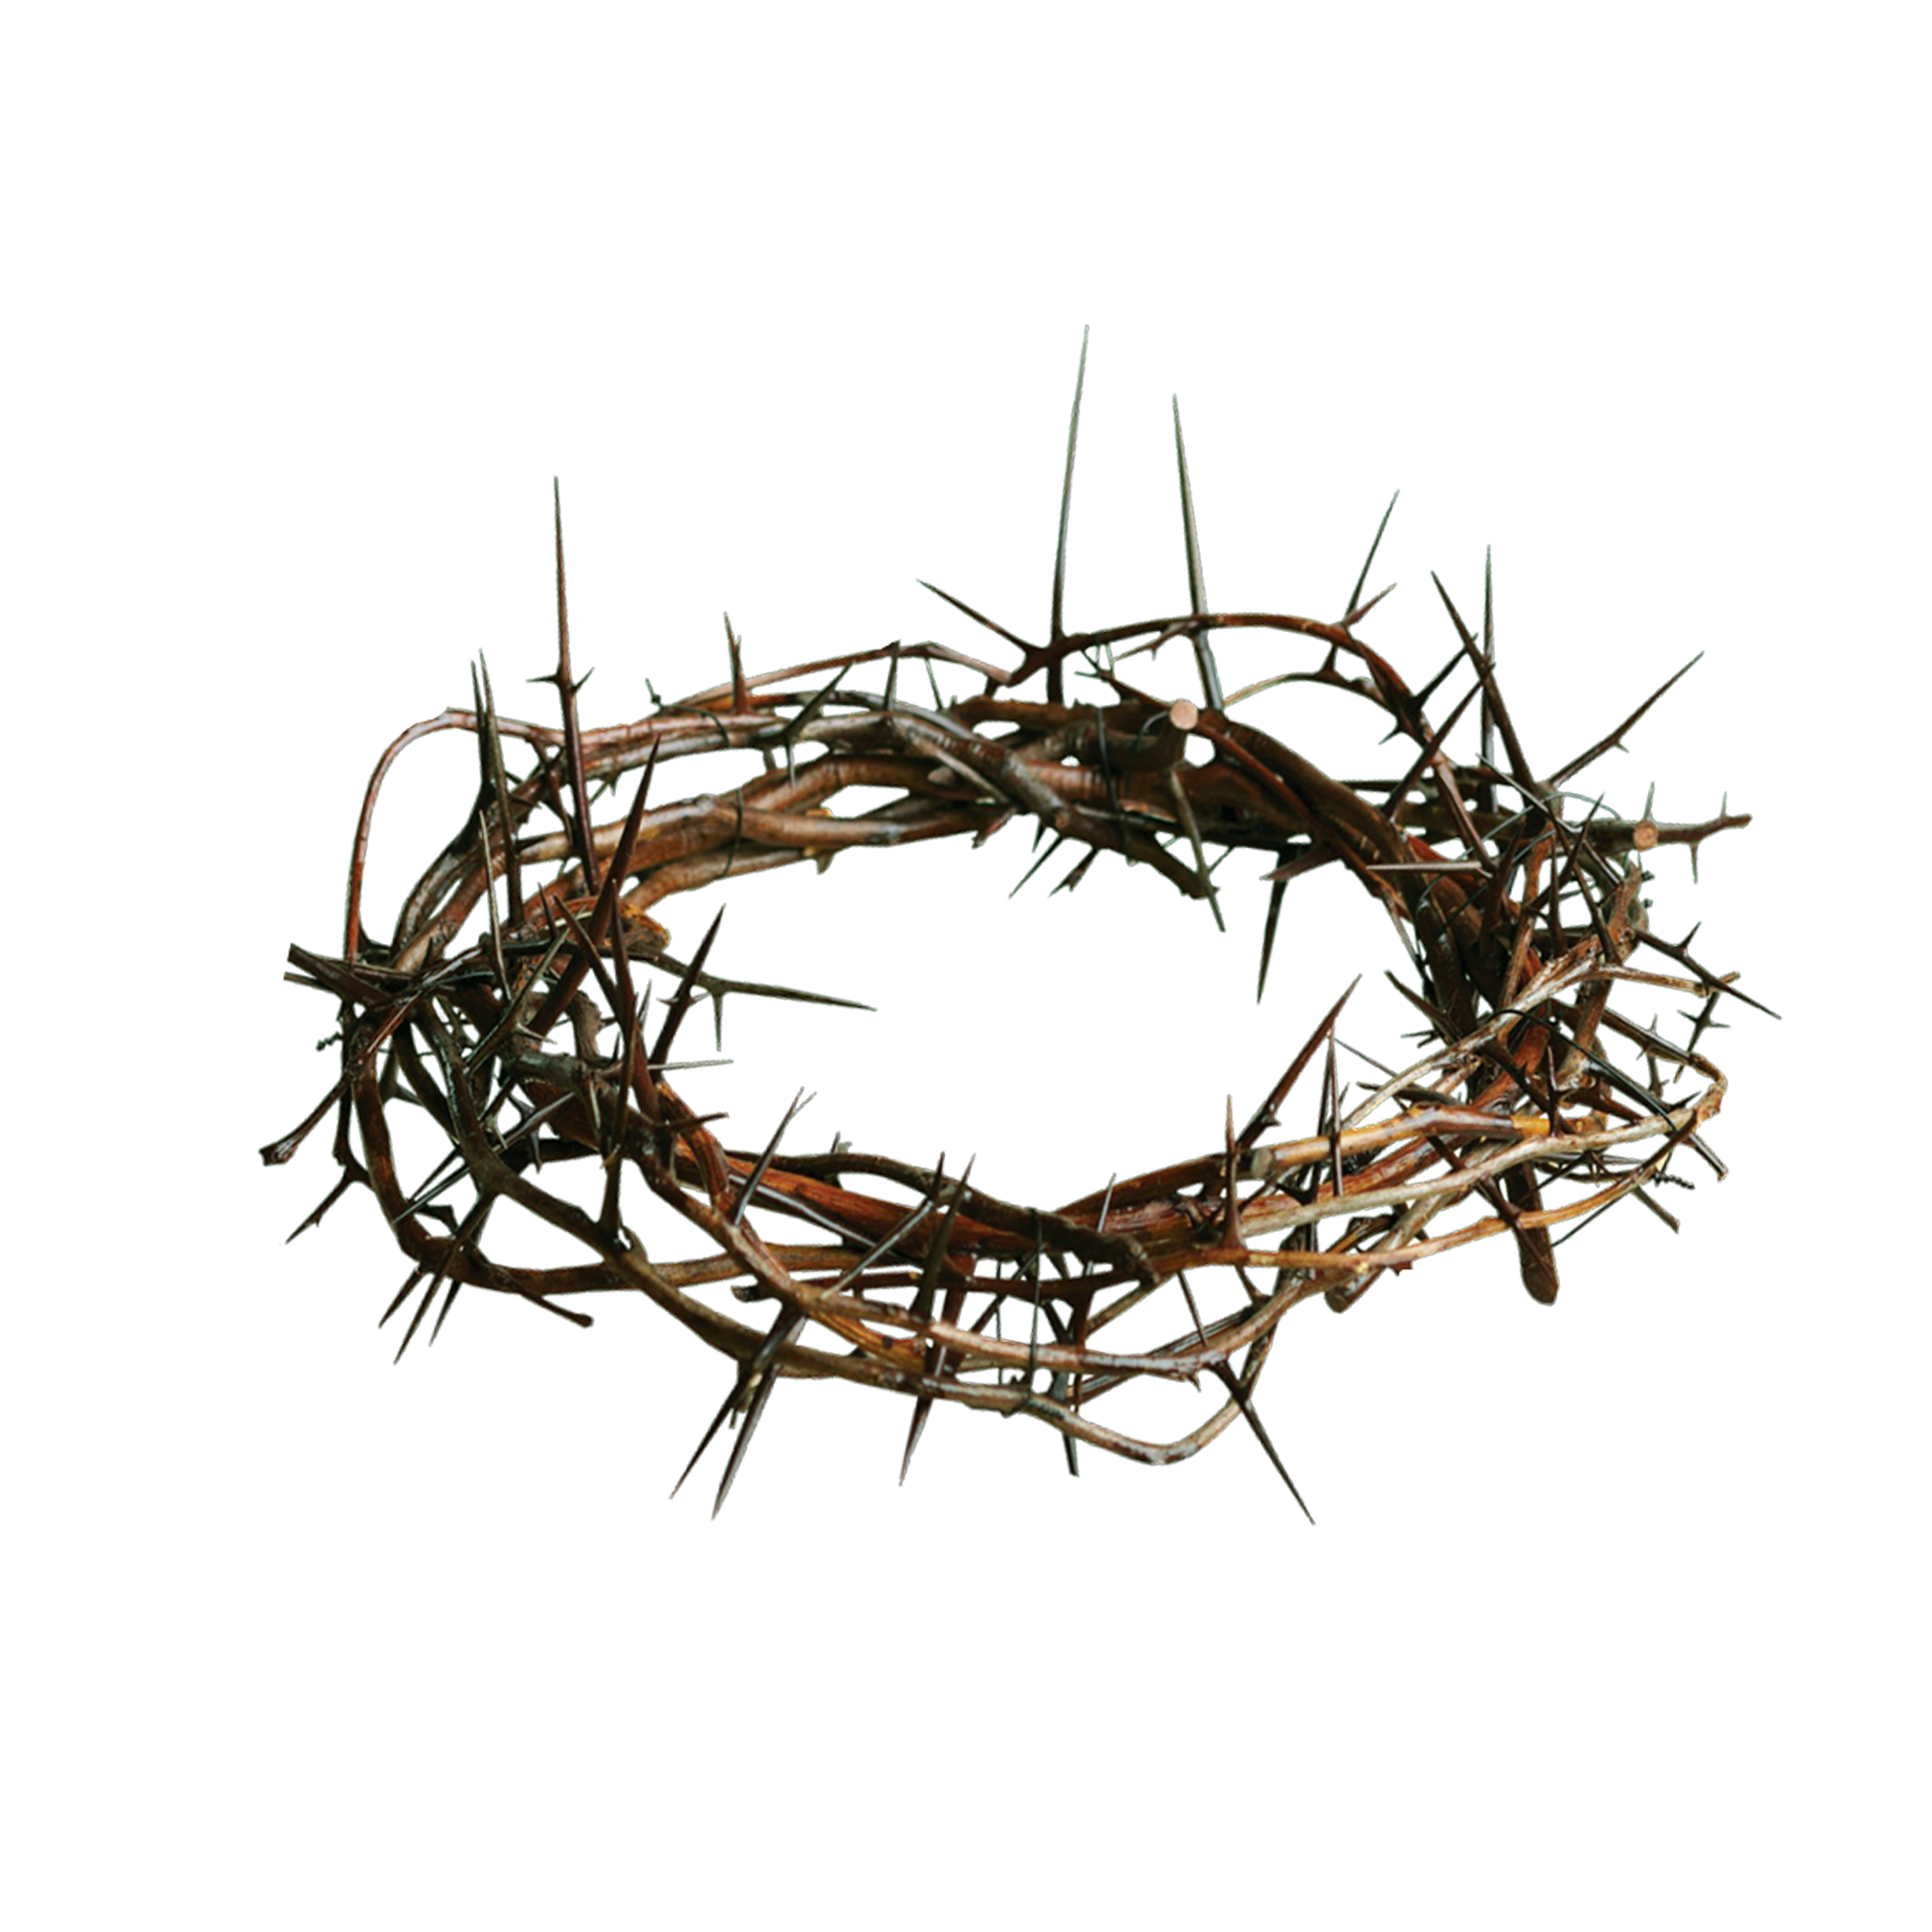 . Hdpng.com Crown Of Thorns.png Hdpng.com  - Crown Of Thorns, Transparent background PNG HD thumbnail